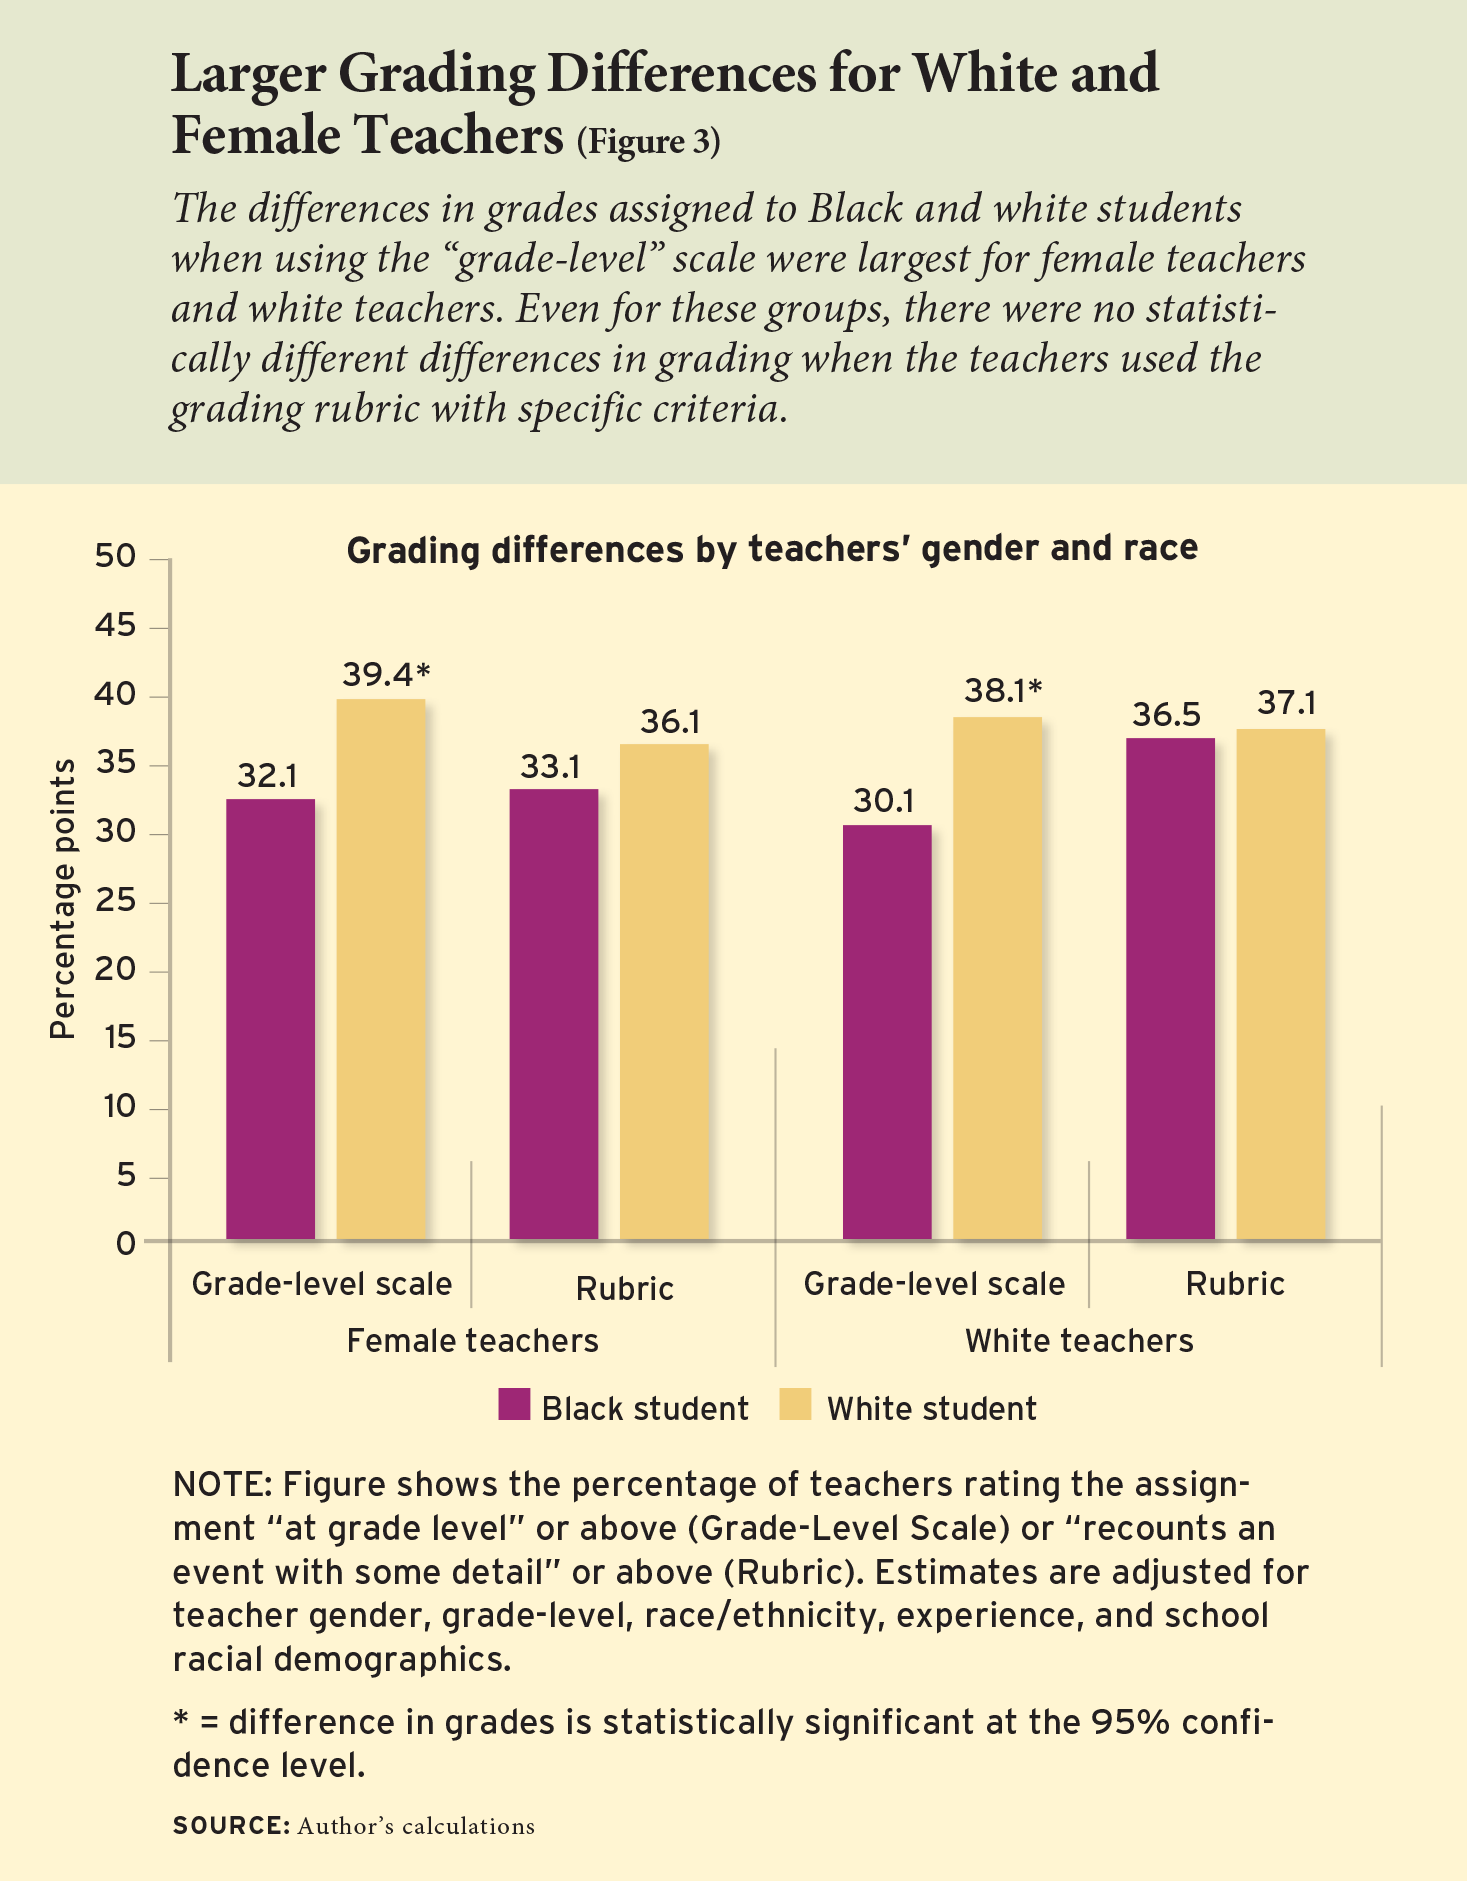 Figure 3: Larger Grading Differences for White and Female Teachers